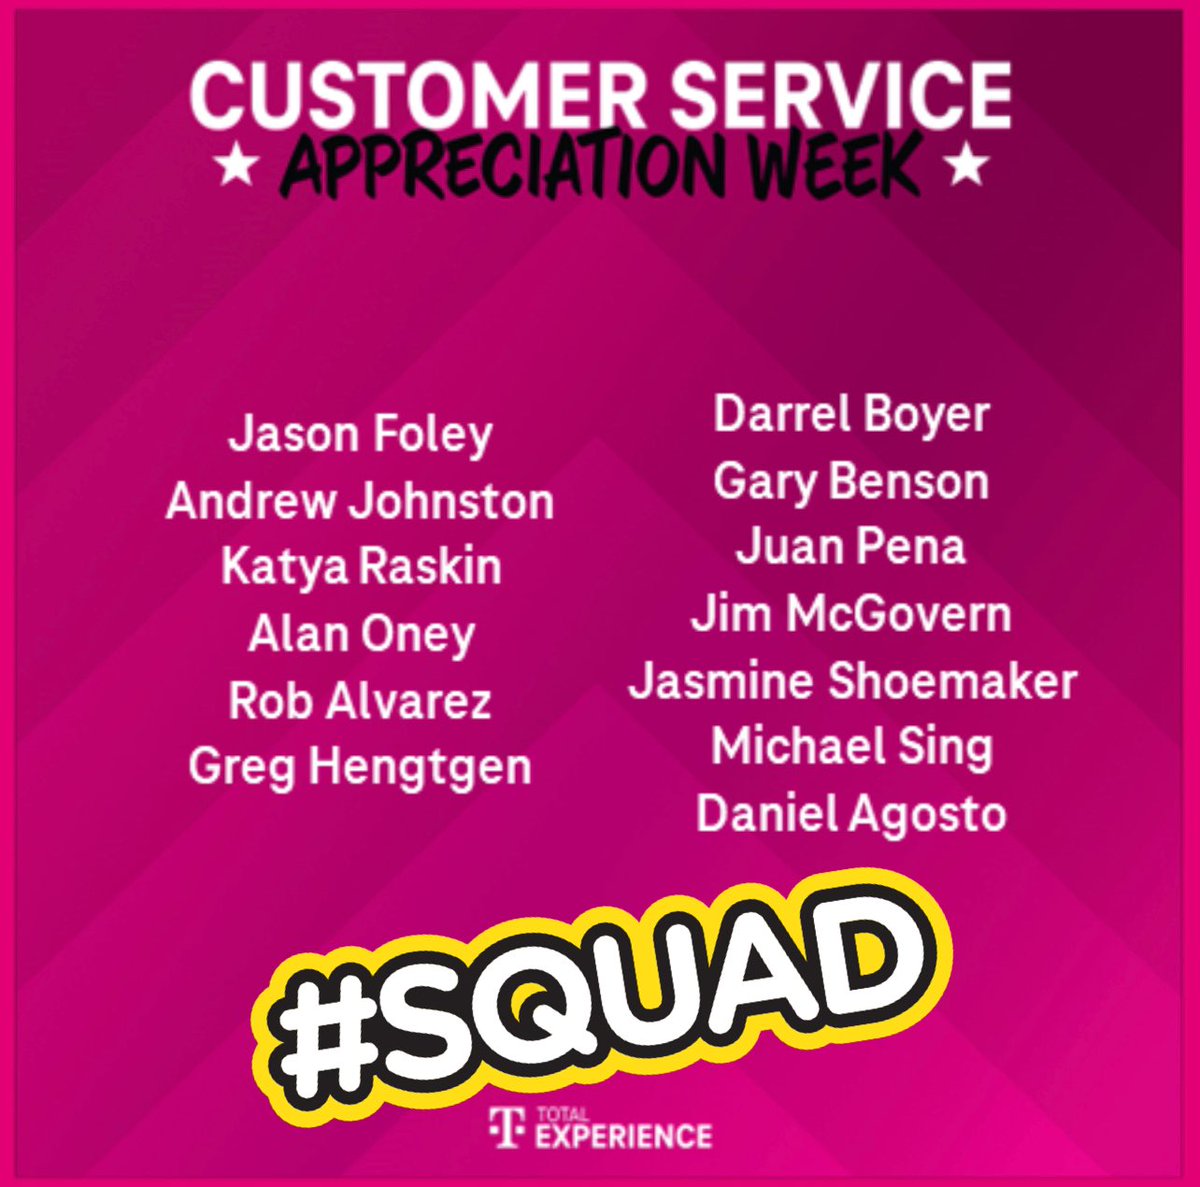 I have to recognize those that support those that support our customers! I appreciate the hard work our market puts in led by these amazing leaders! There is no way we can do what we do w/out them supporting & fighting for their front line! @AnnieG_FL @thayesnet #SEPowerOfLove